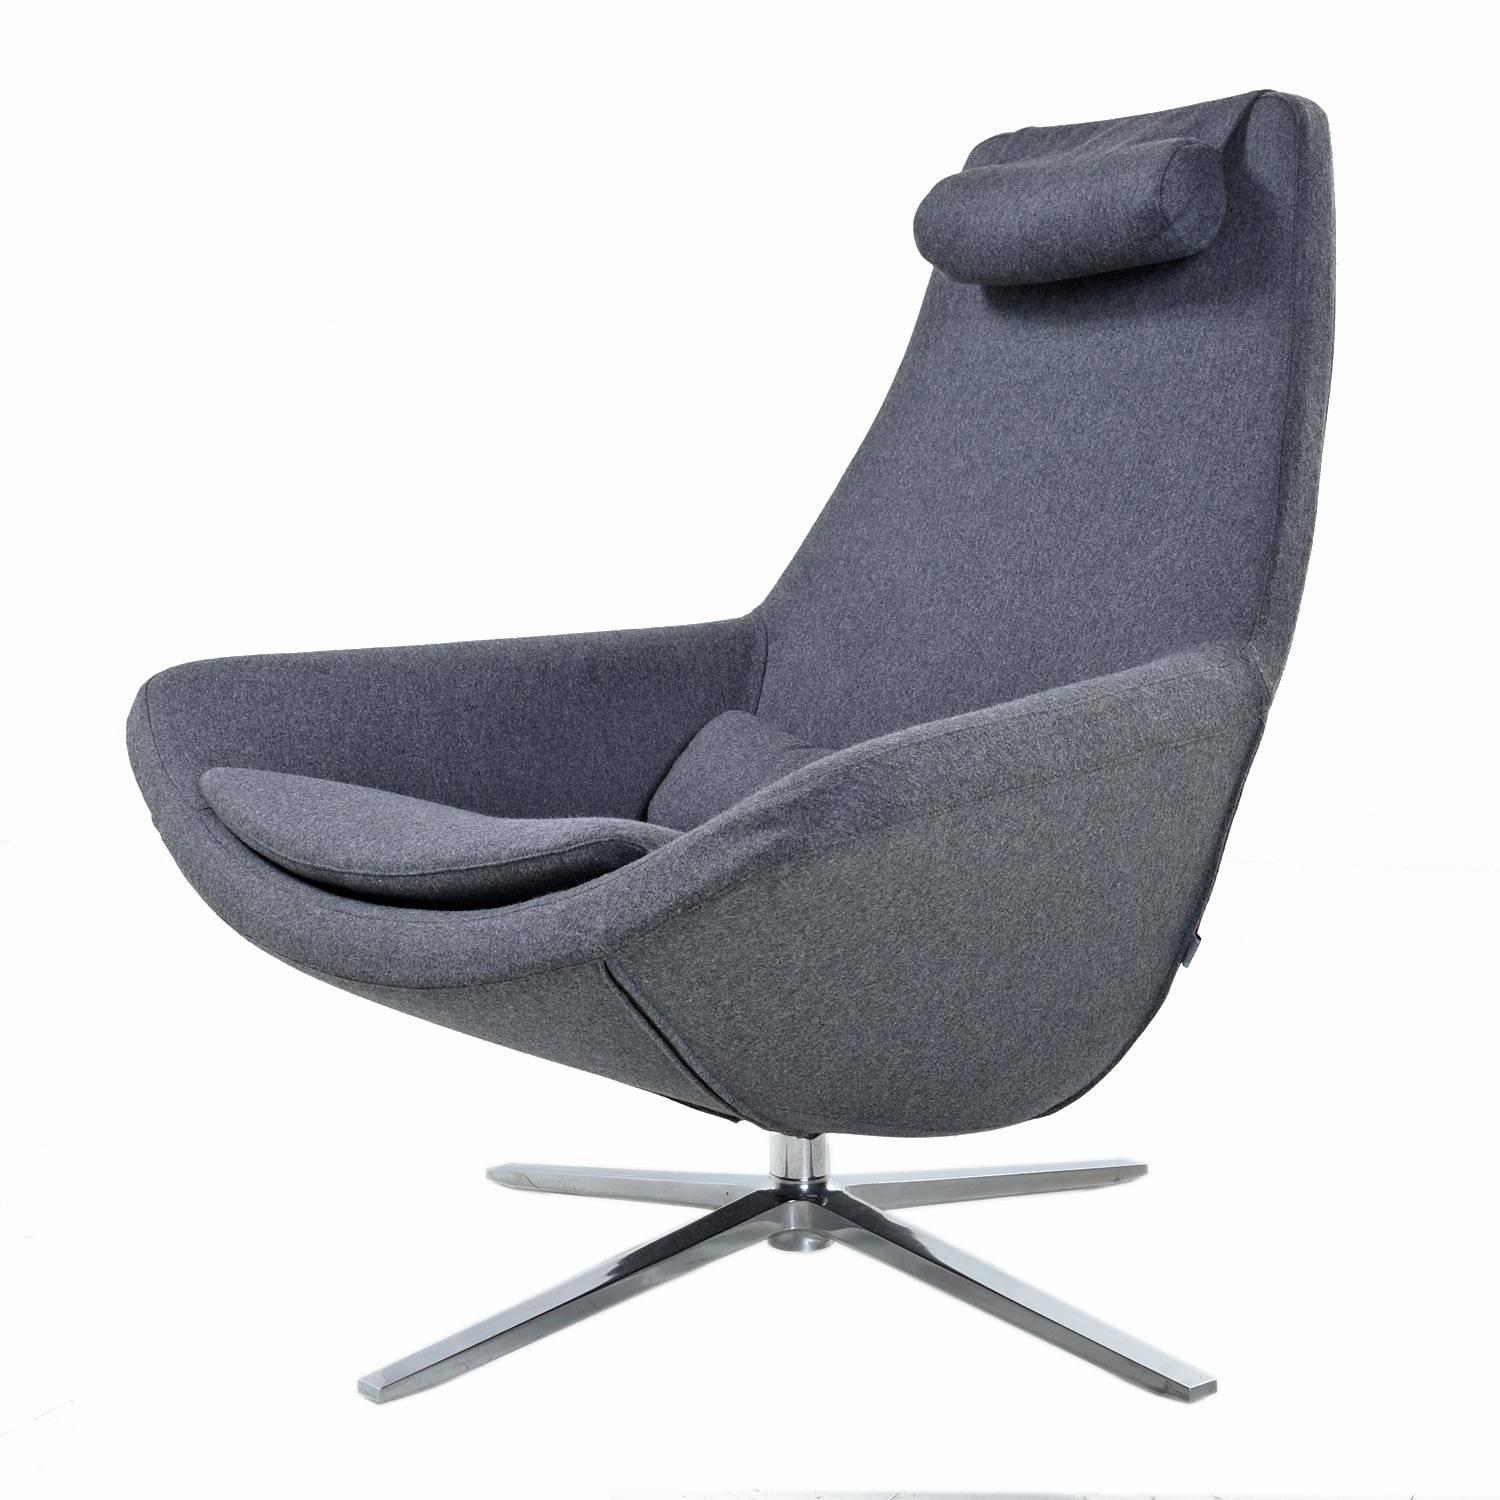 Designer: Jeffrey Bernett
Collection: B&B Italia
Year: 2002

The seat that flows uninterruptedly into the armrests is the hallmark of this small armchair and relaxation chair. The former, with aluminium swivel base and four spokes, combines